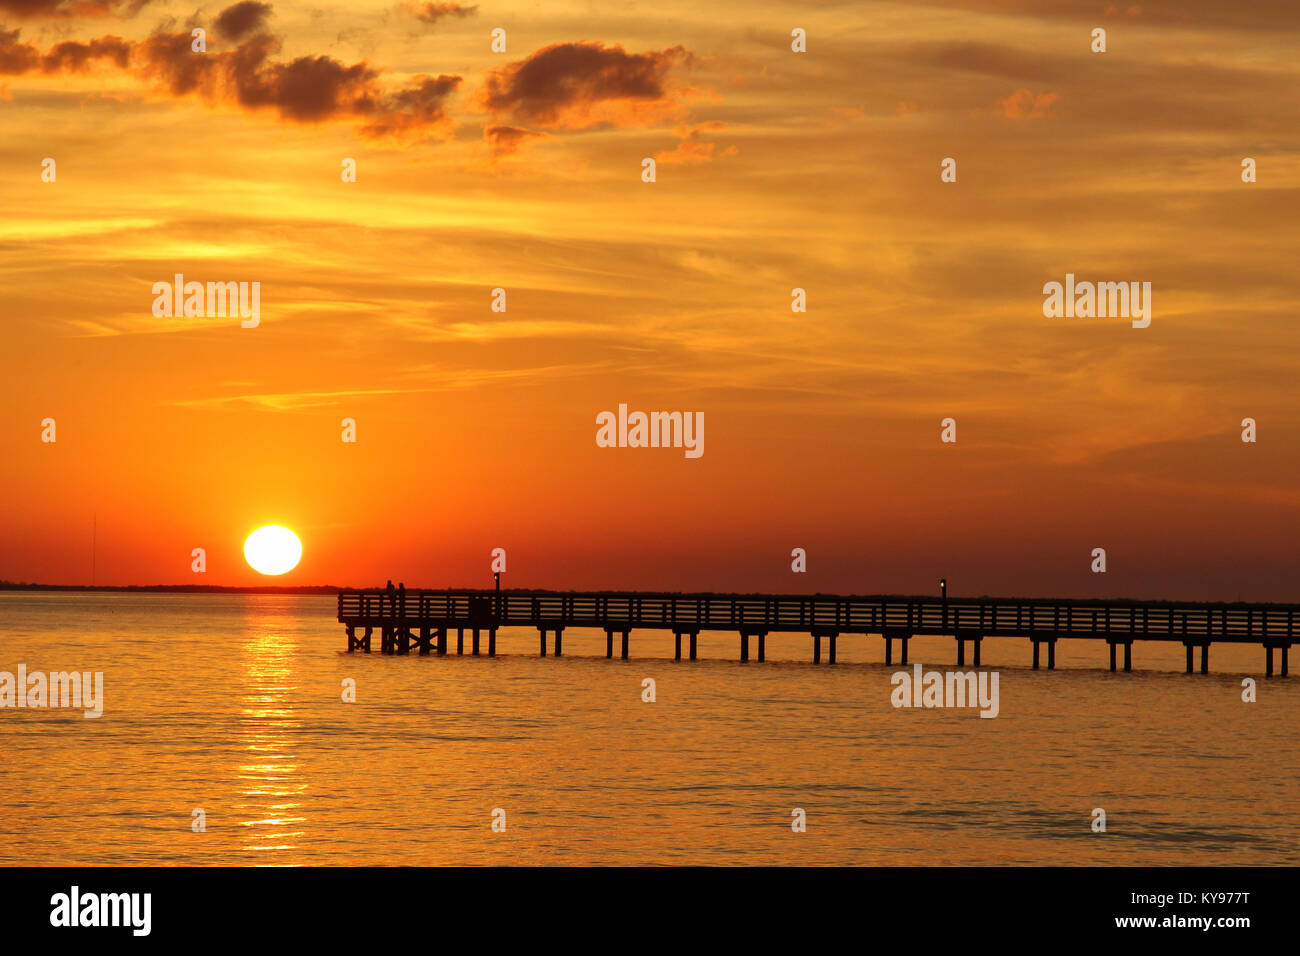 Charlotte Harbor sunset with golden sky and silhouetted fishing pier, Florida USA. Stock Photo